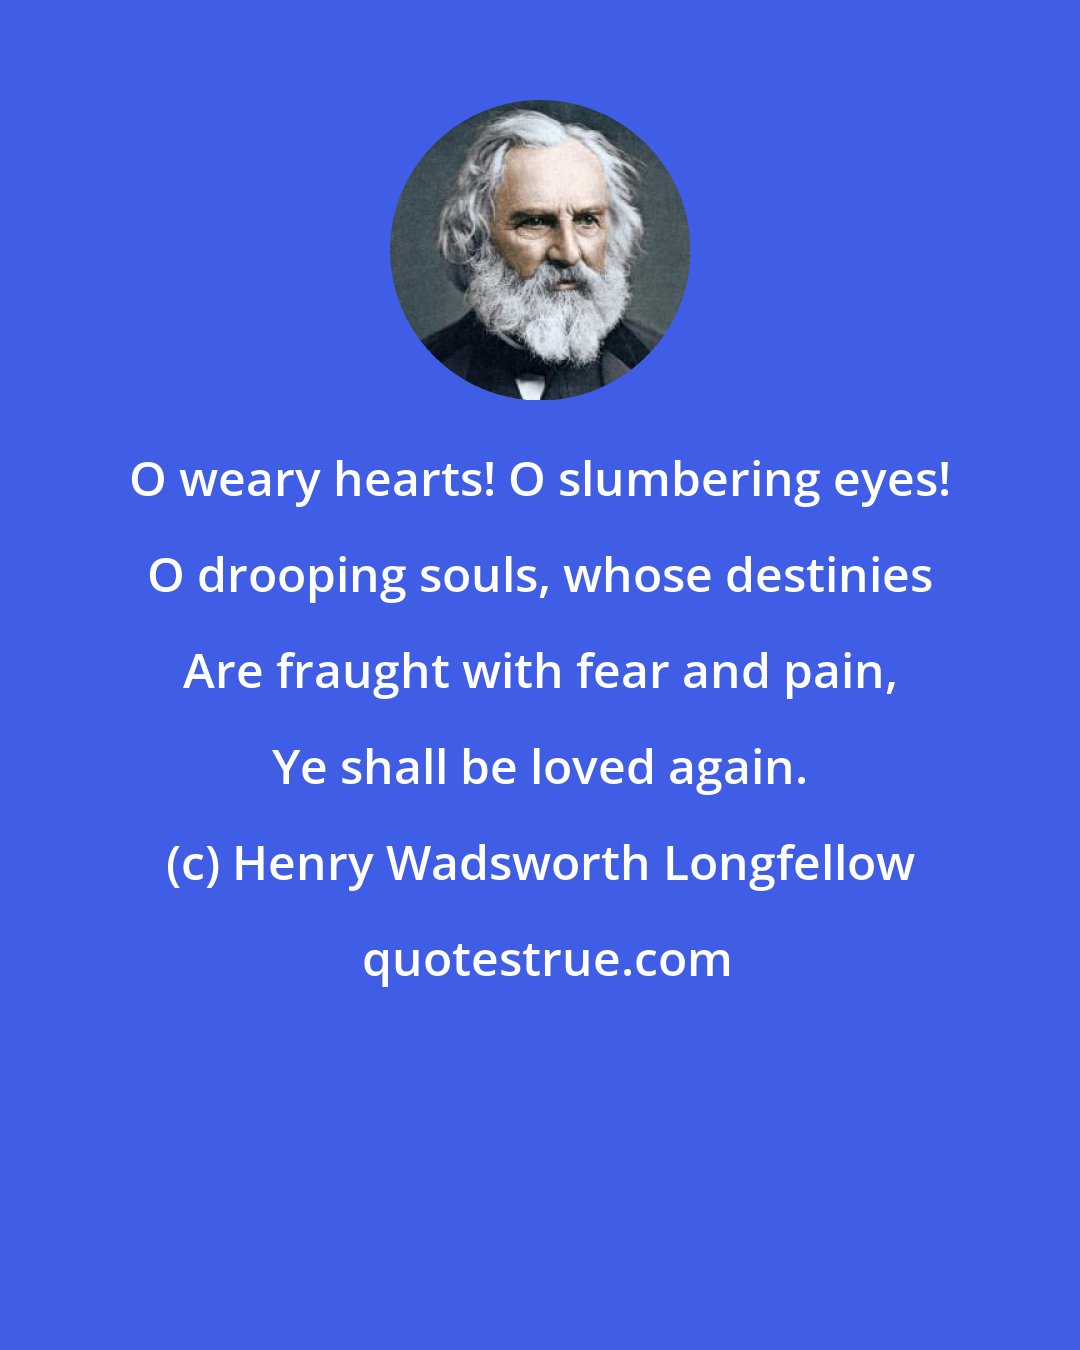 Henry Wadsworth Longfellow: O weary hearts! O slumbering eyes! O drooping souls, whose destinies Are fraught with fear and pain, Ye shall be loved again.